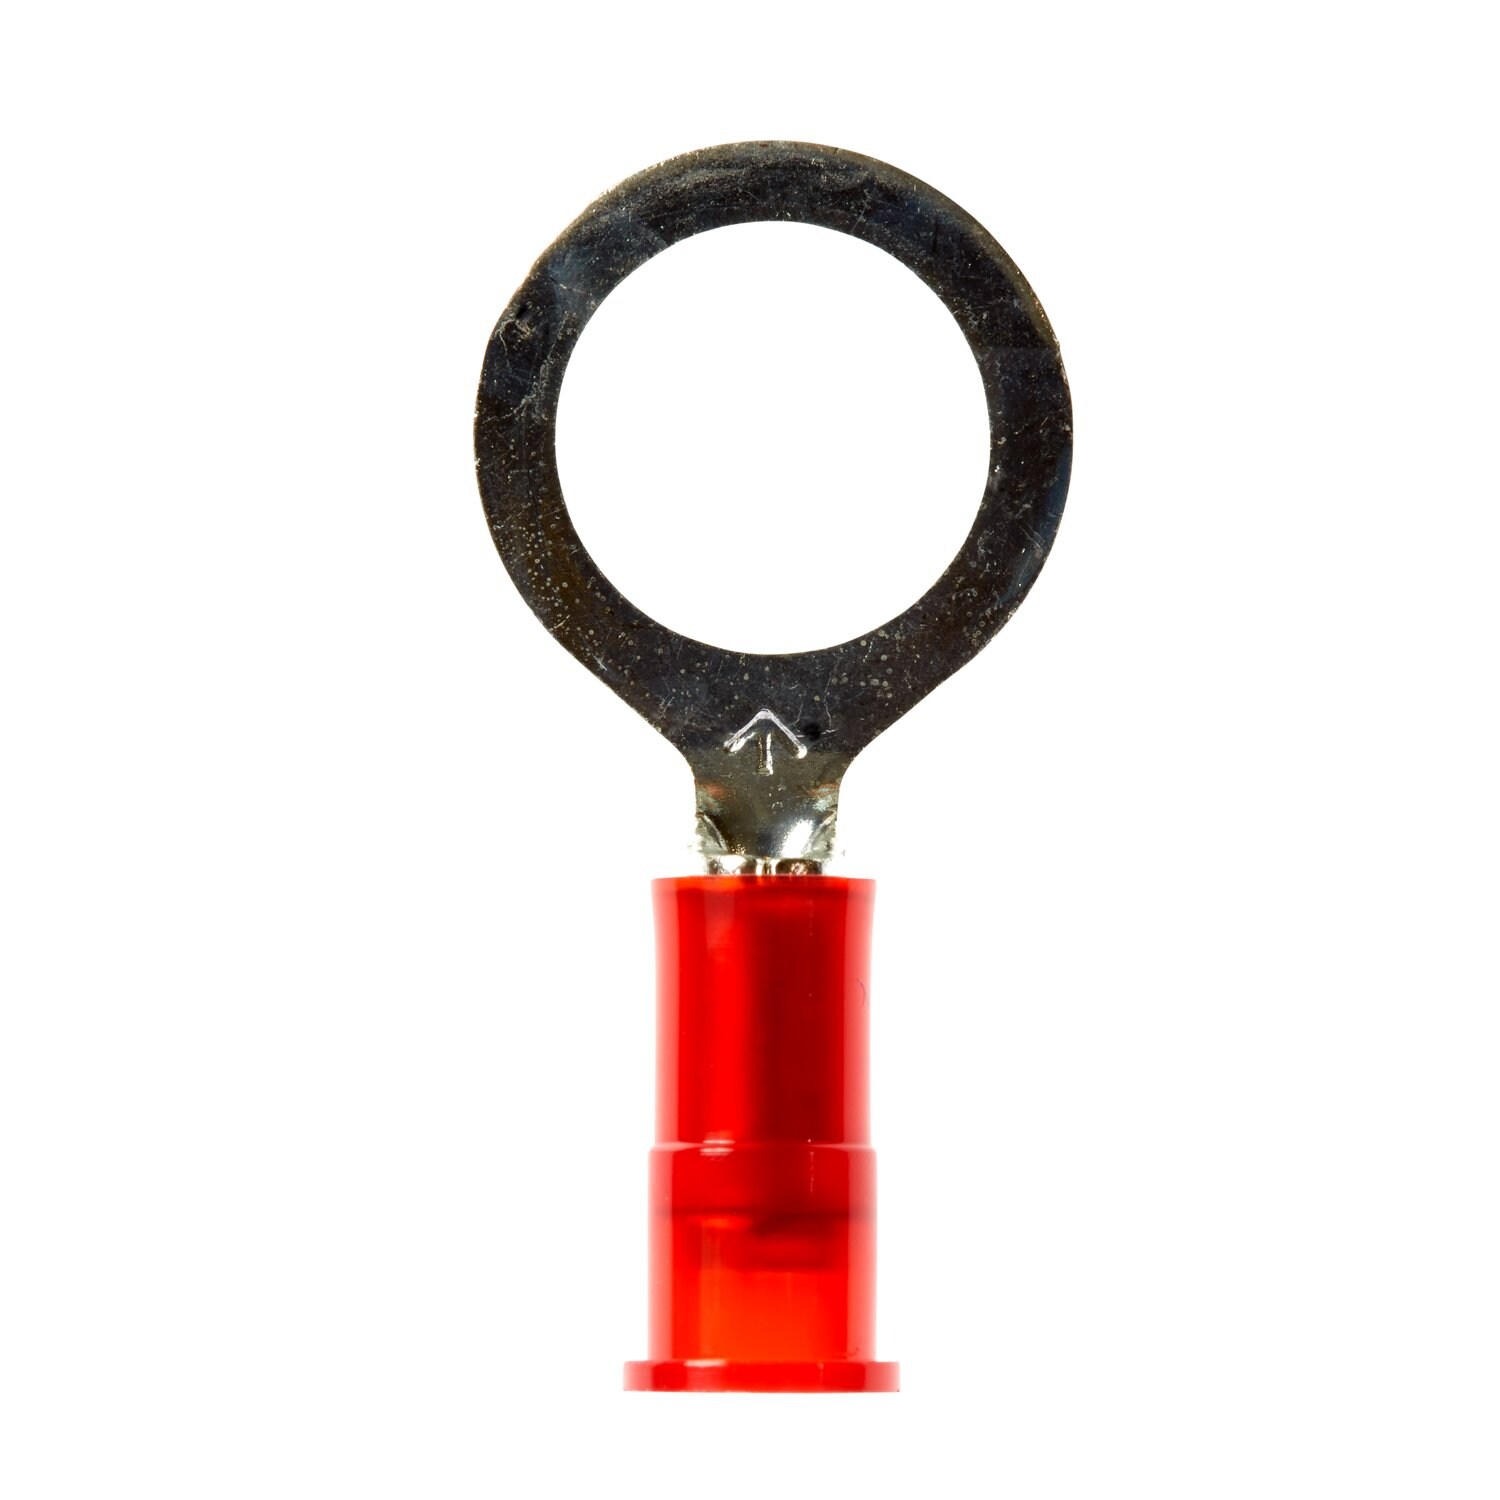 7100165298 - 3M Scotchlok Ring Nylon Insulated, 100/bottle, MNG18-38RX,
standard-style ring tongue fits around the stud, 500/Case